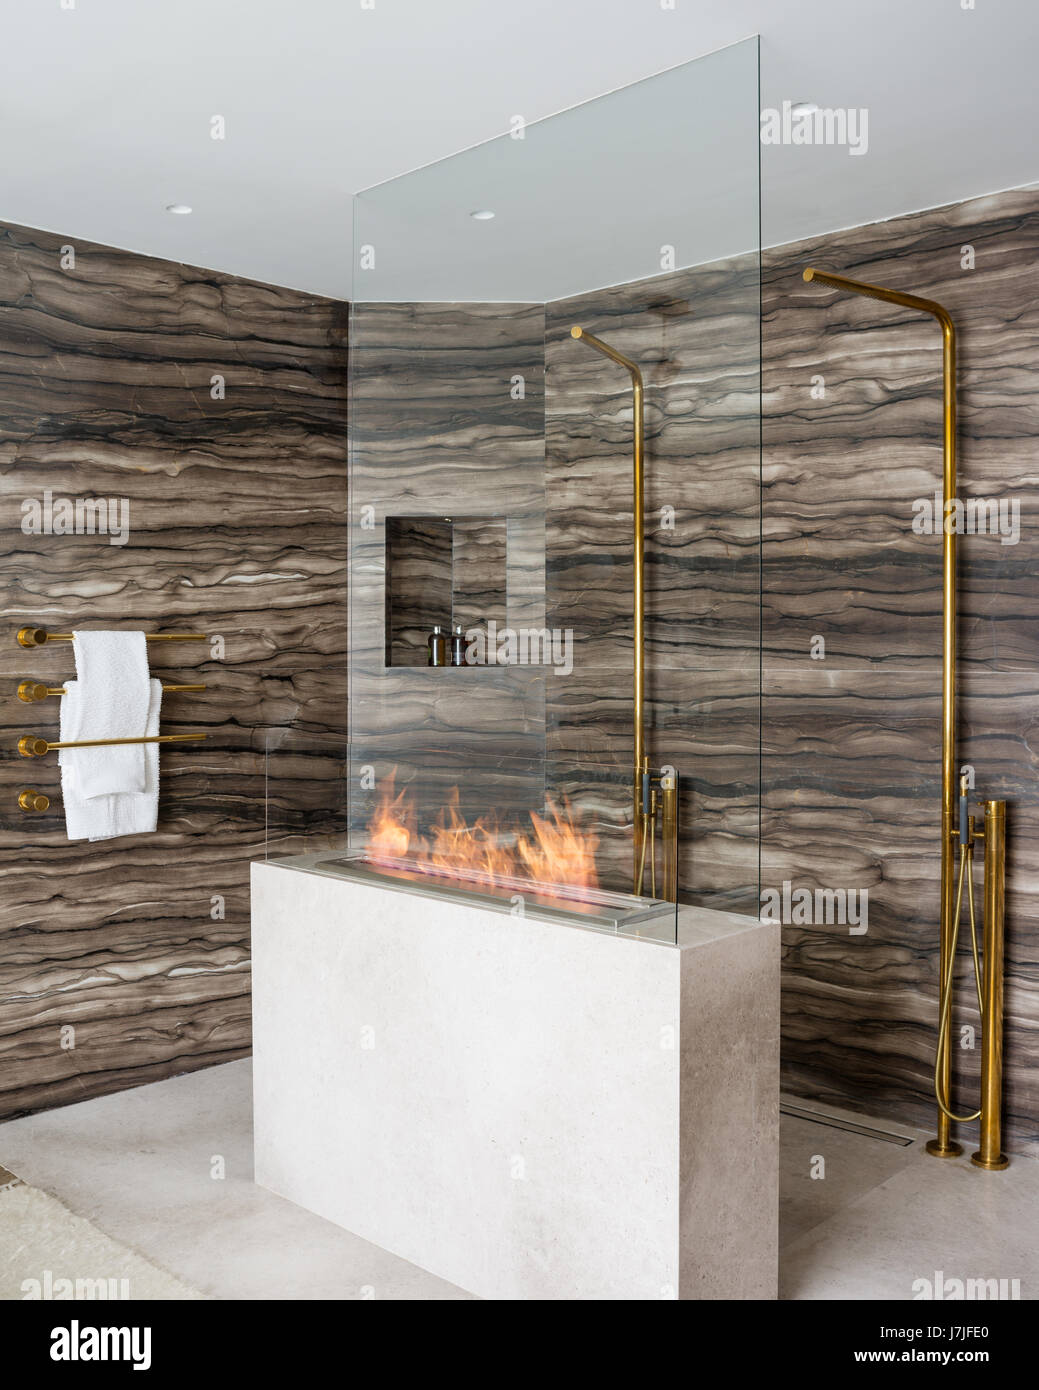 Sienna brown marble lines walls of shower area with gas fire Stock Photo